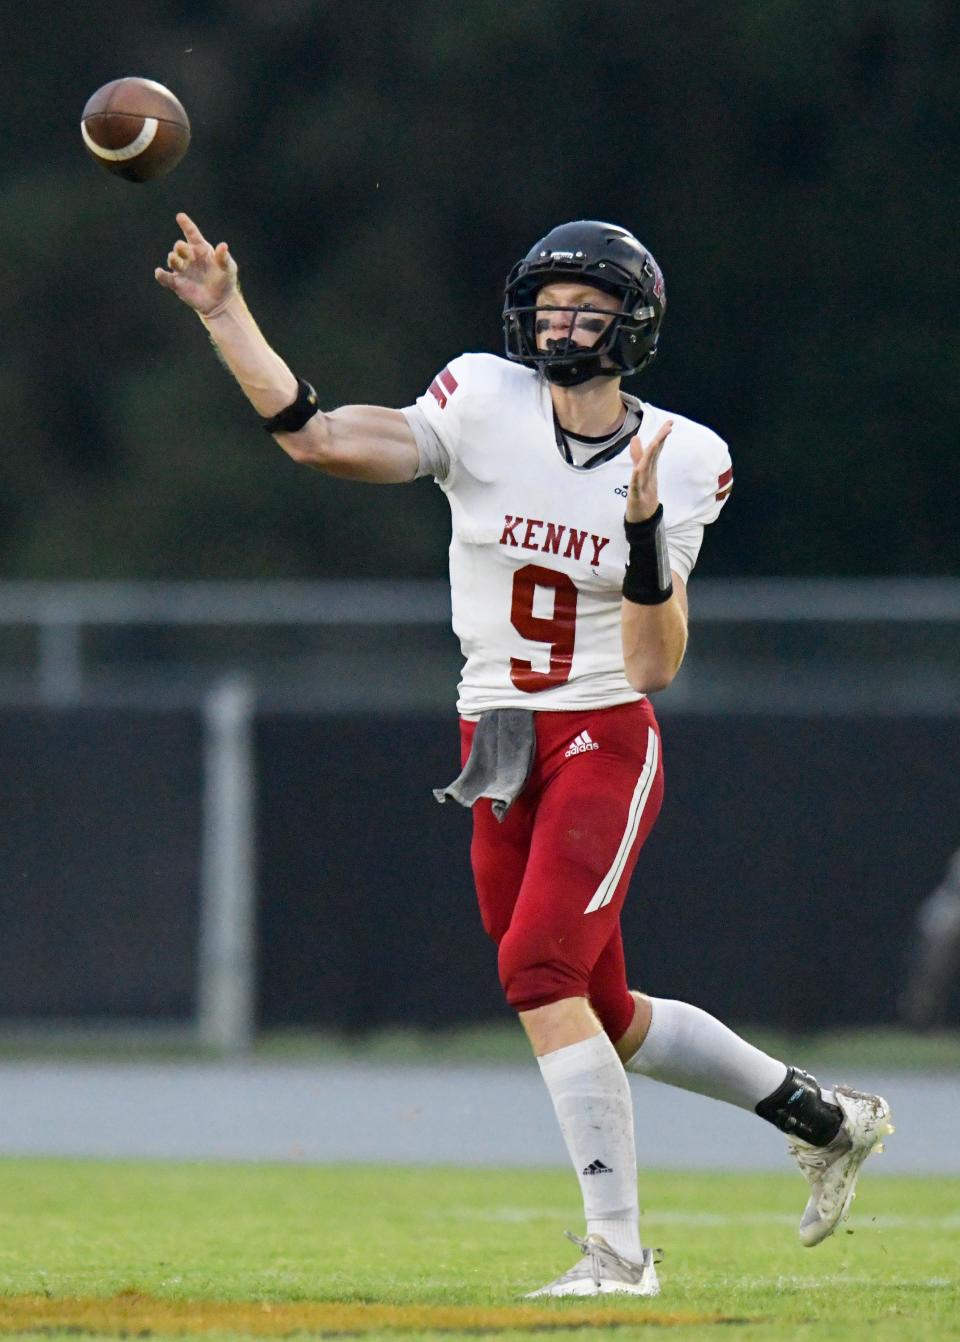 Bishop Kenny quarterback James Resar throws a pass during first half action. The Tocoi Creek Toros hosted the Bishop Kenny Crusaders at the school's Saint Johns County campus Friday, September 9, 2022.